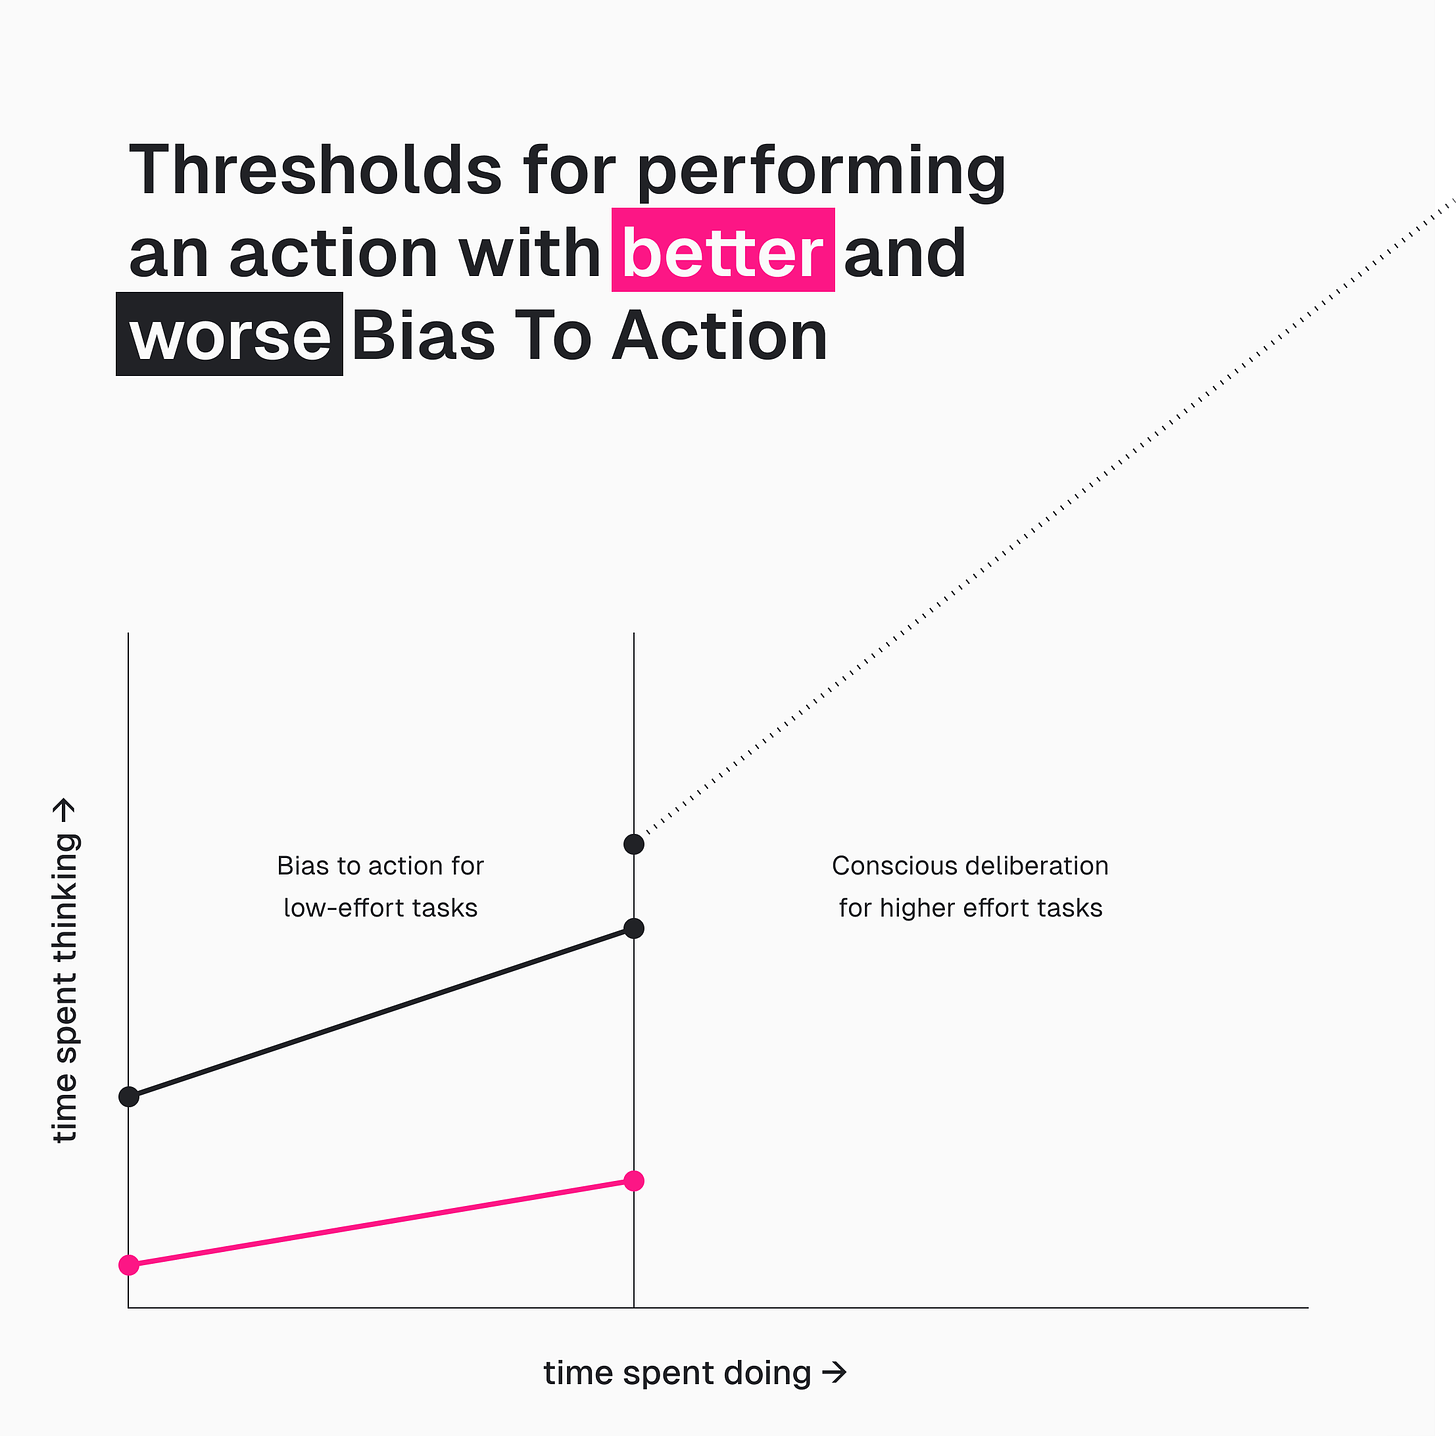 A chart comparing better and worse bias to action. On the x-axis is 'time spent doing', on the y-axis is 'time spent thinking'. Both lines are linear, but worse bias to action is steeper and higher up on the y-axis. 